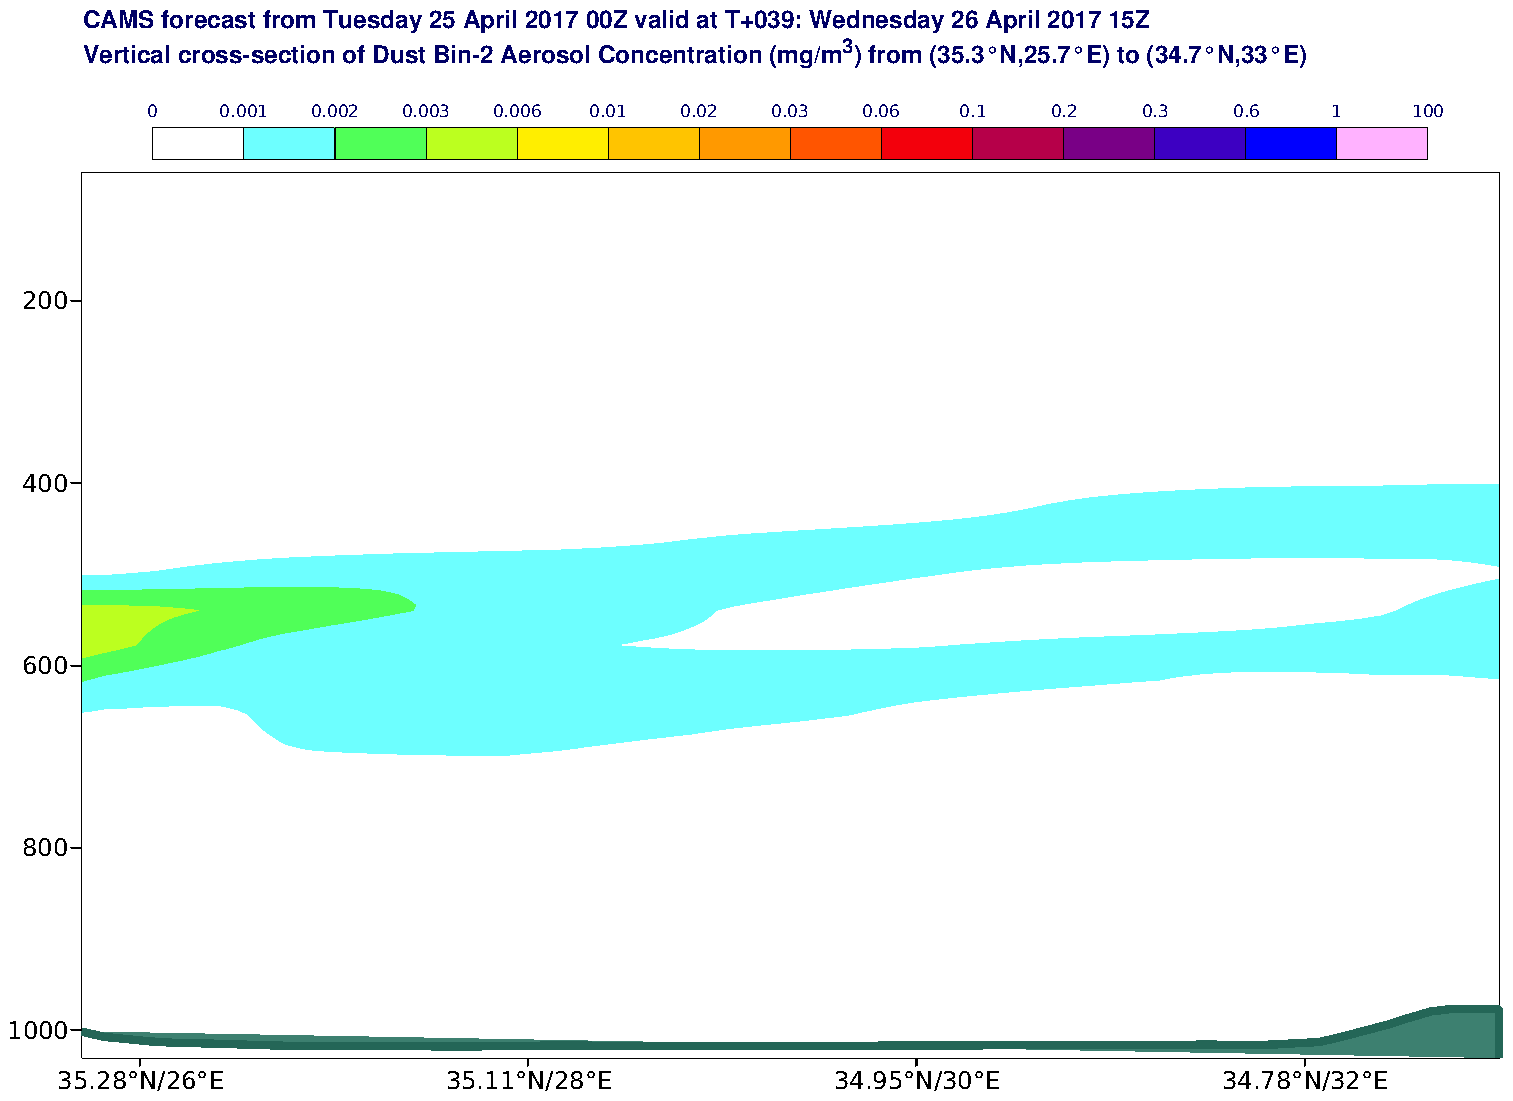 Vertical cross-section of Dust Bin-2 Aerosol Concentration (mg/m3) valid at T39 - 2017-04-26 15:00